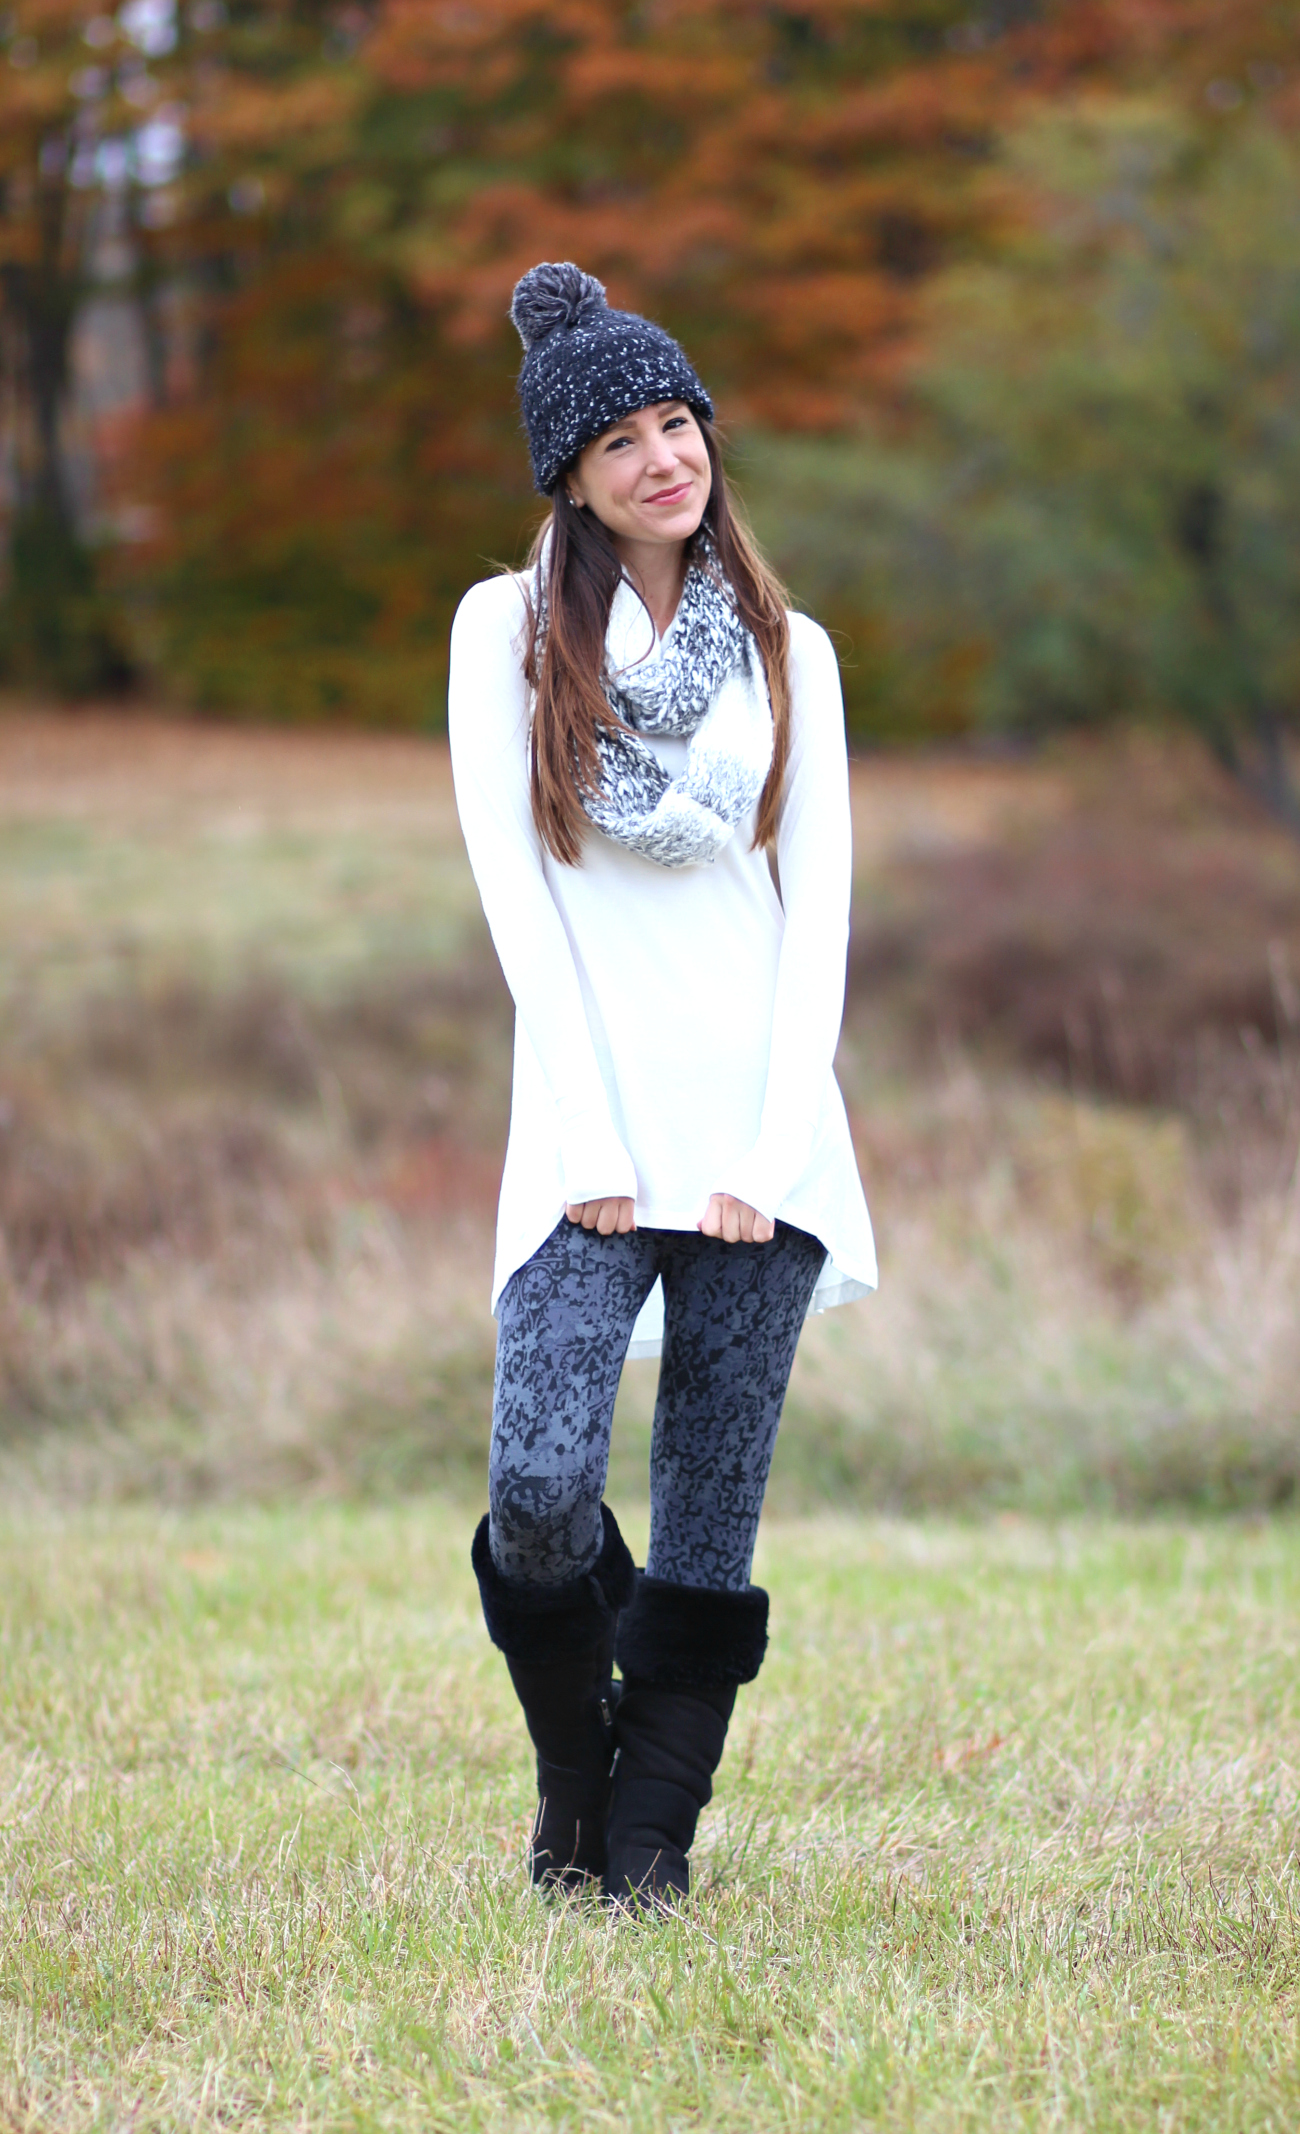 Layer for warmth this winter with affordable and comfy loungewear from Cuddl Duds